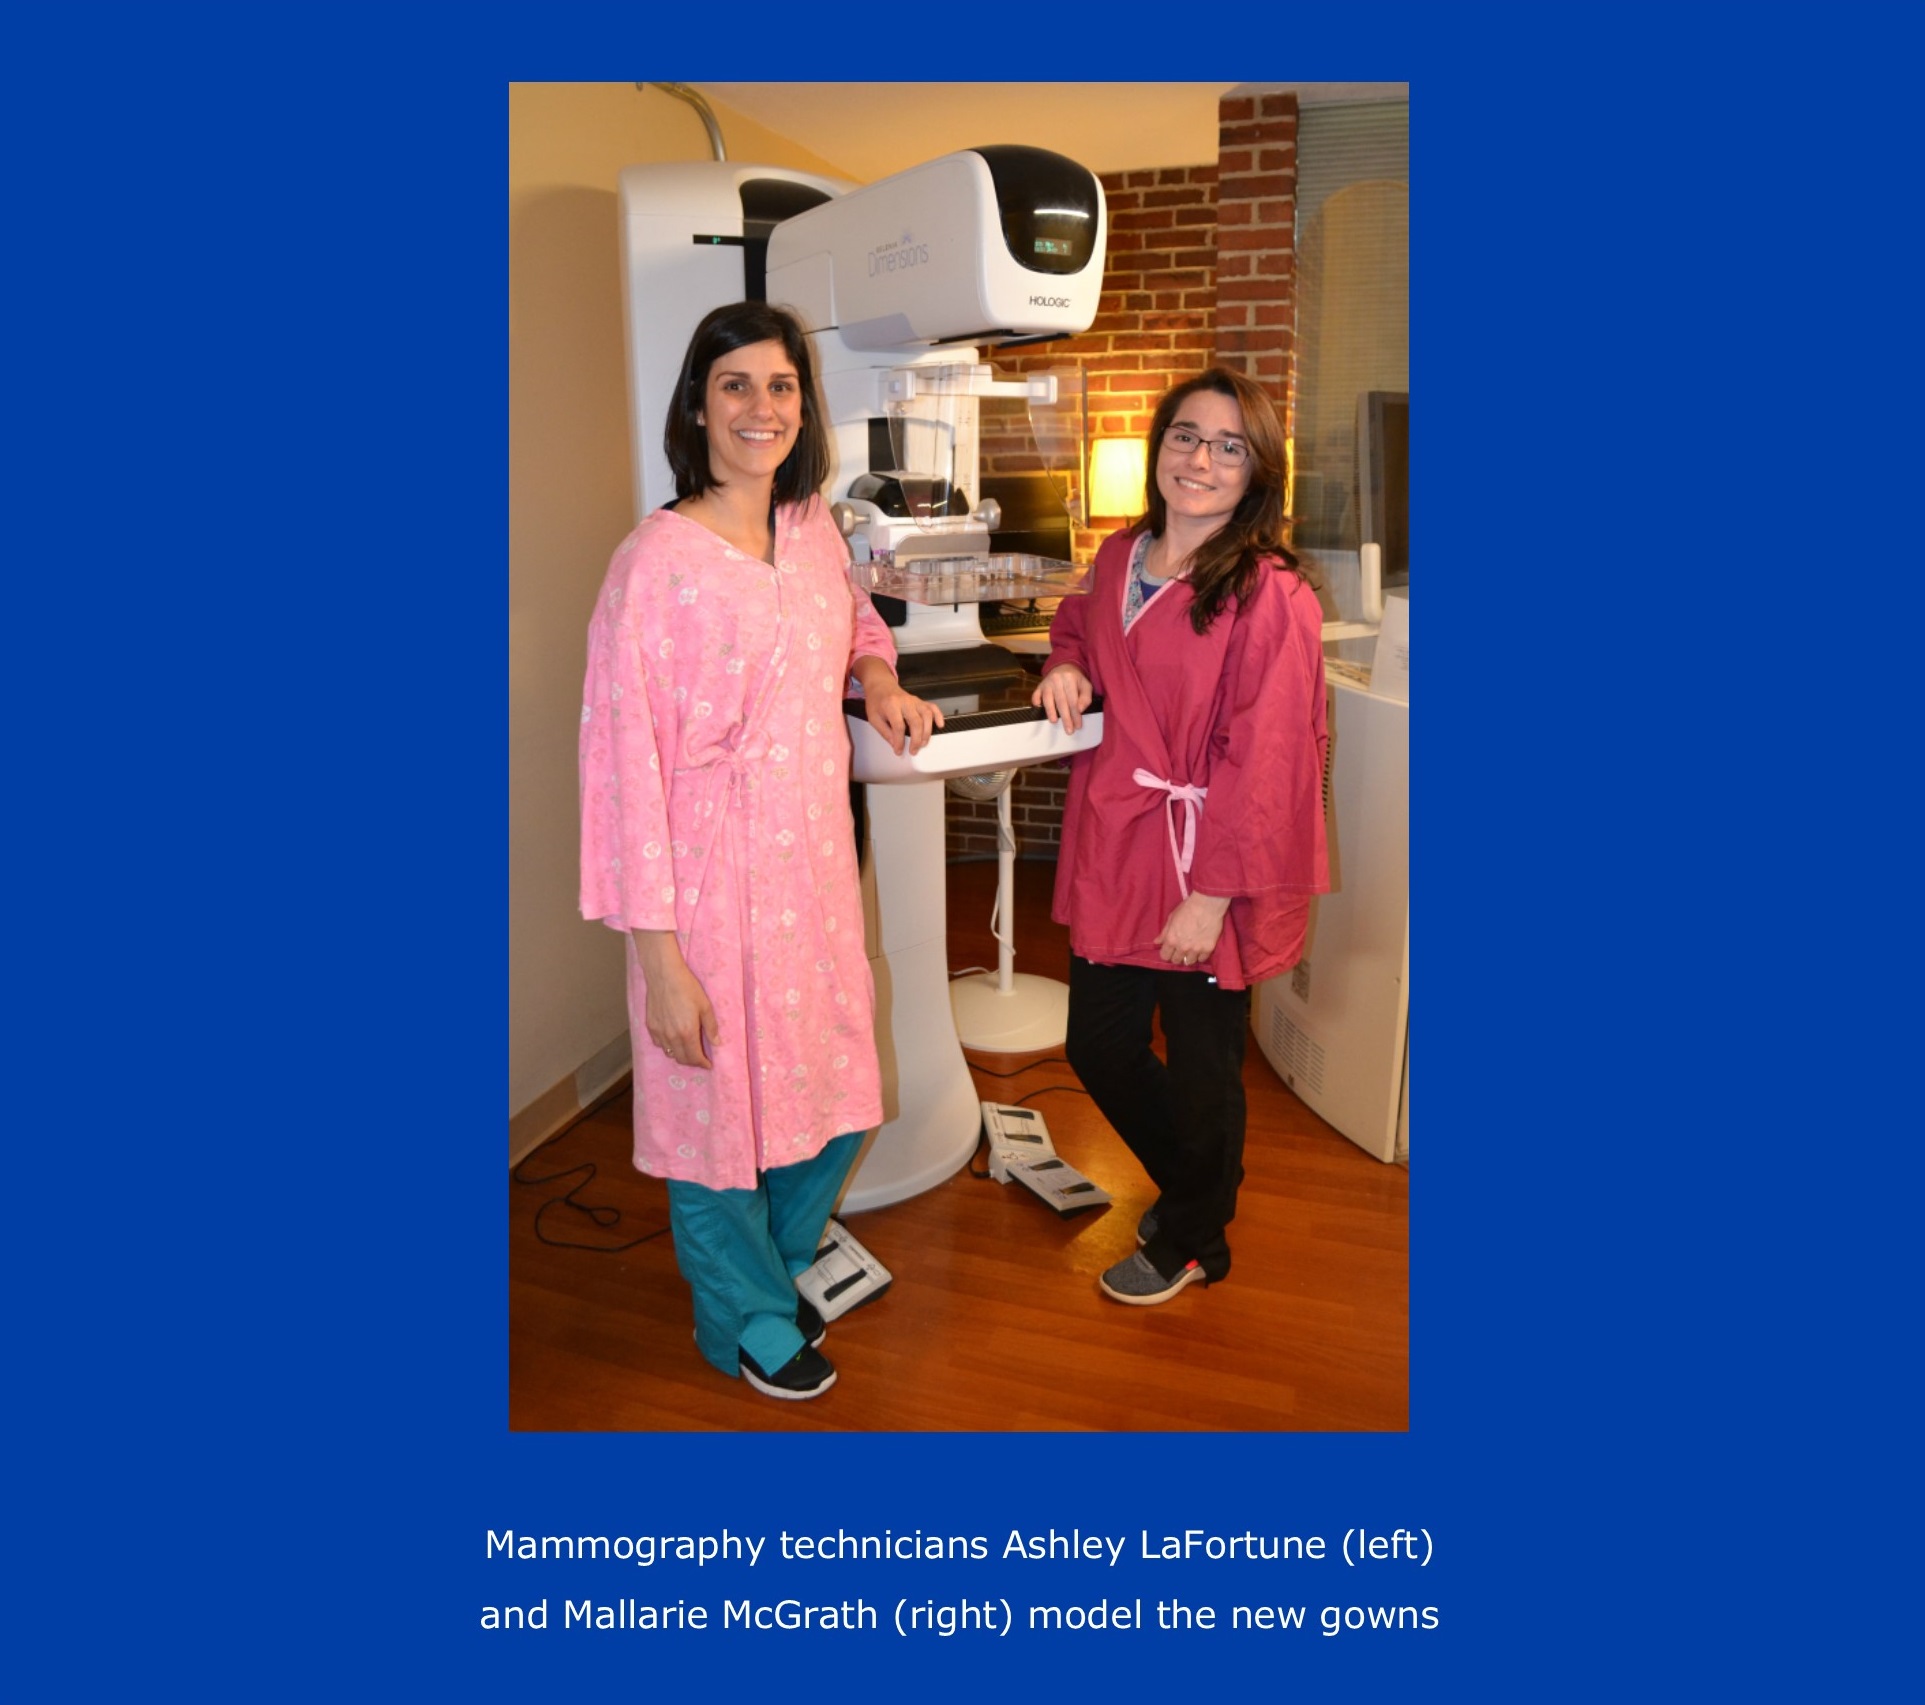 Mammography technicians model the new gowns